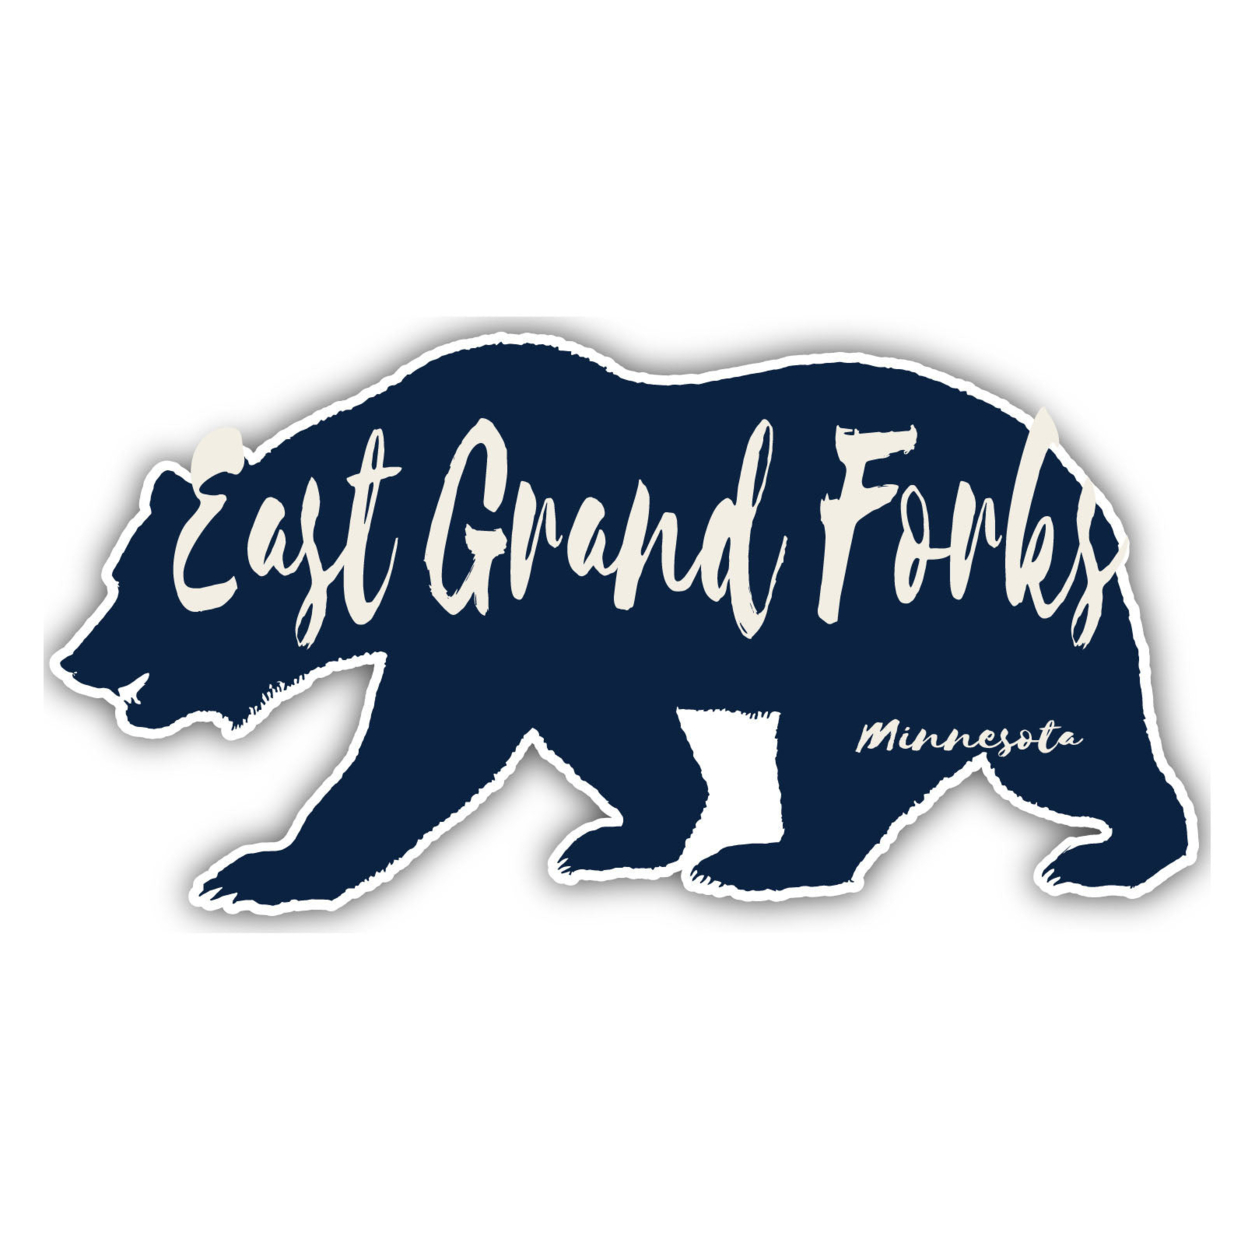 East Grand Forks Minnesota Souvenir Decorative Stickers (Choose Theme And Size) - Single Unit, 2-Inch, Camp Life